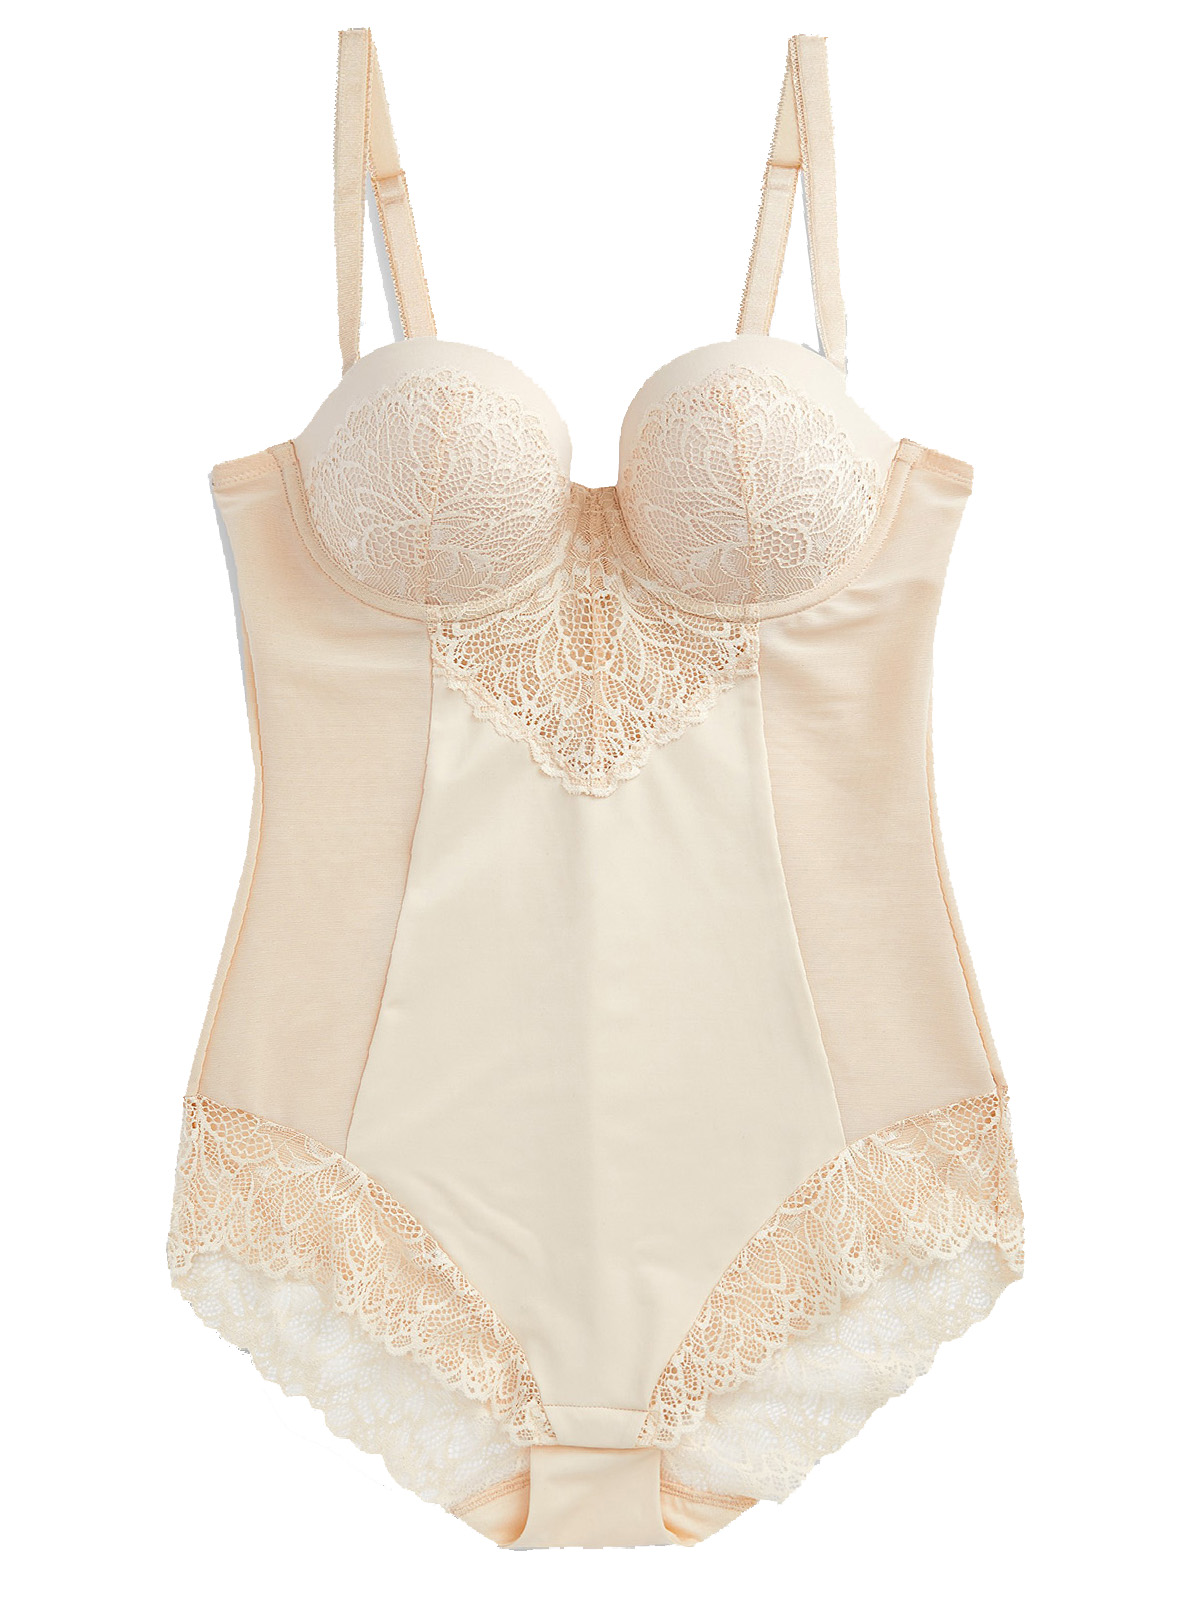 NATURAL Firm Control Cupped Lace Body - Size 34 (B cup)